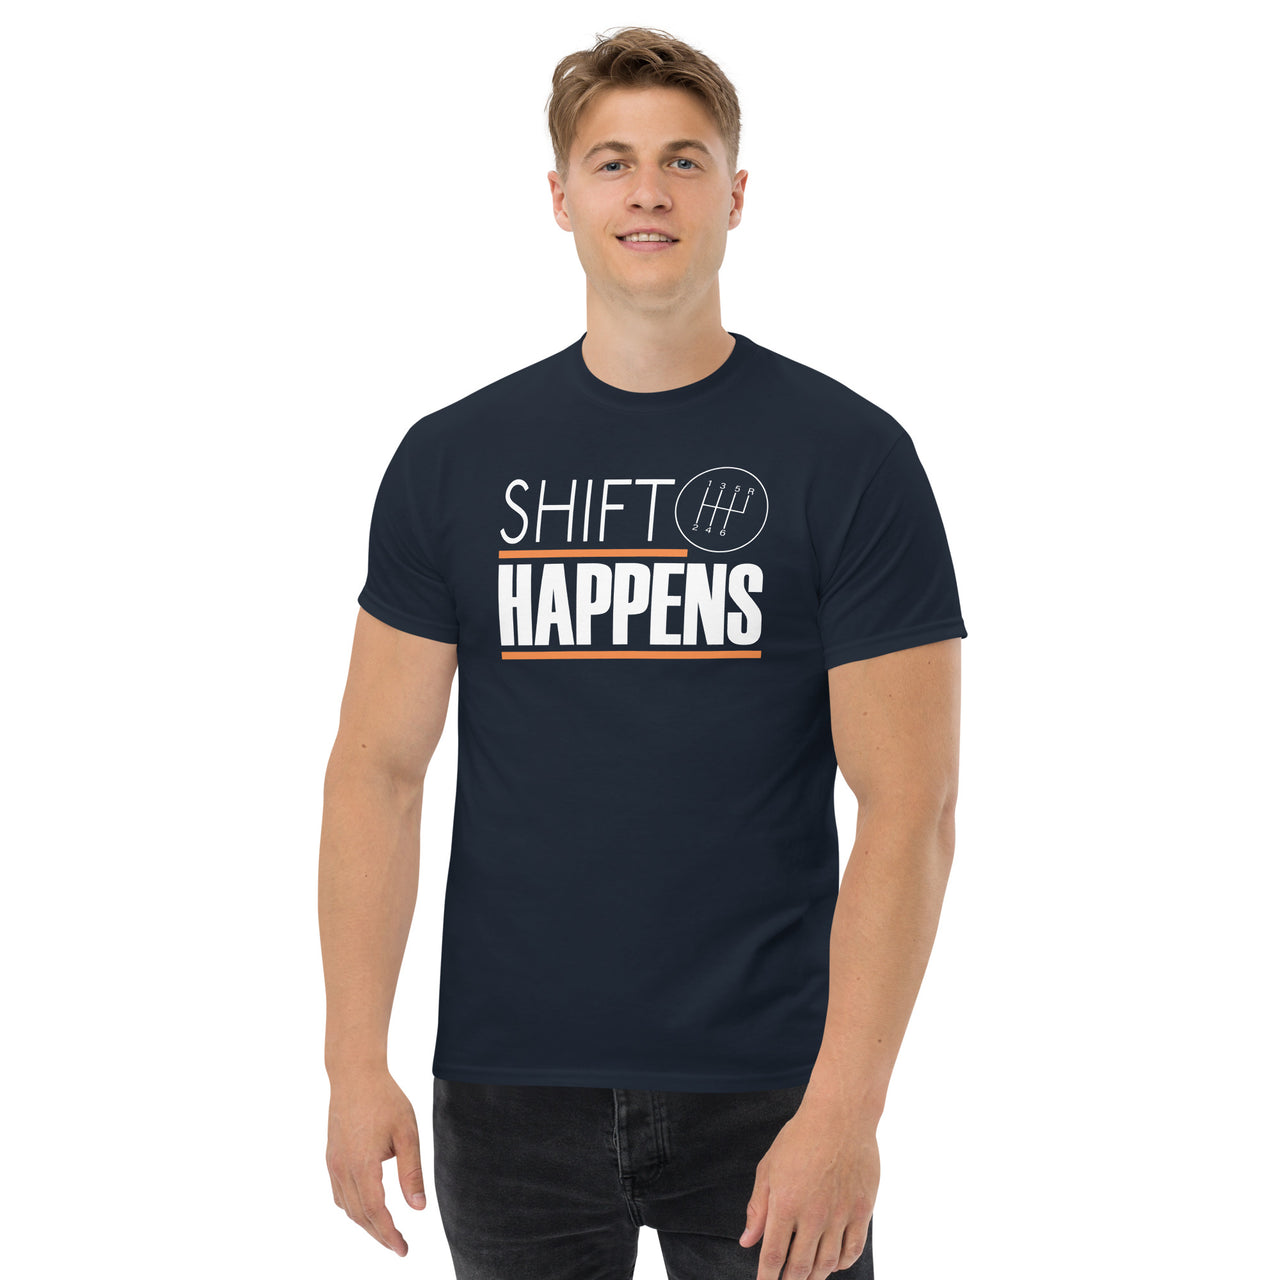 Car Enthusiast T-Shirt, Shift Happens Shirt, Manual Transmission Tee modeled in navy